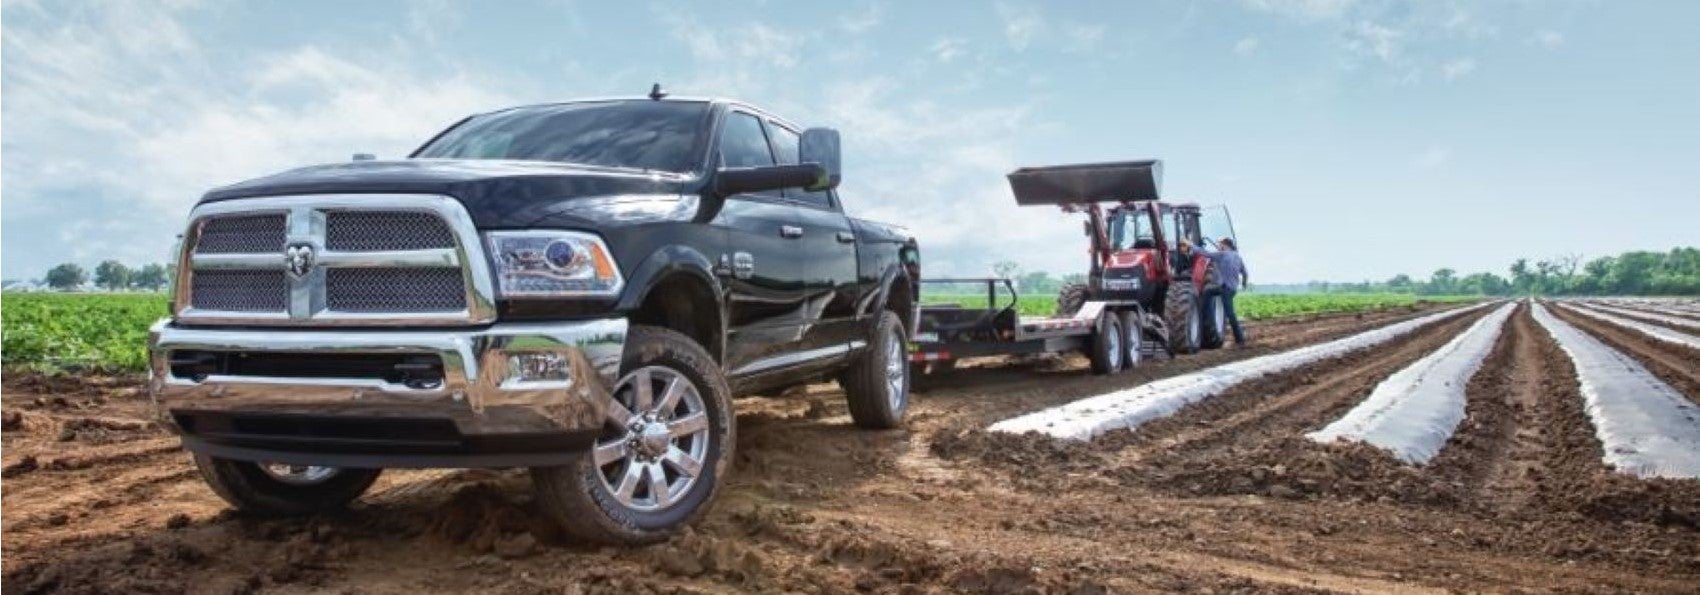 Ram 2500 Towing in the Field